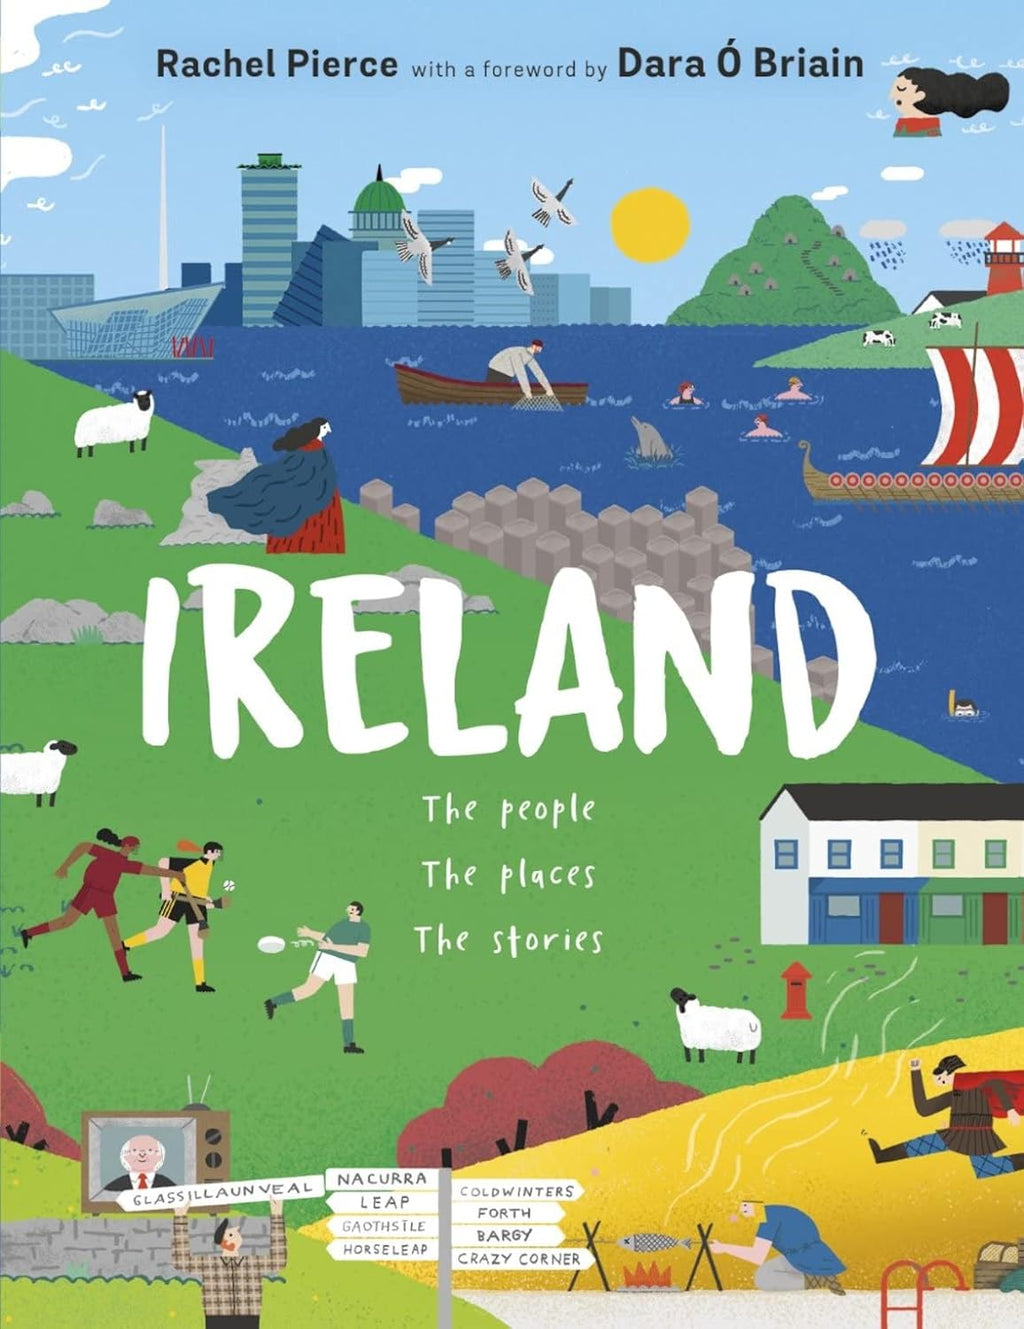 Ireland: The People, The Places, The Stories, The Craic, by Rachel Pierce (Author)